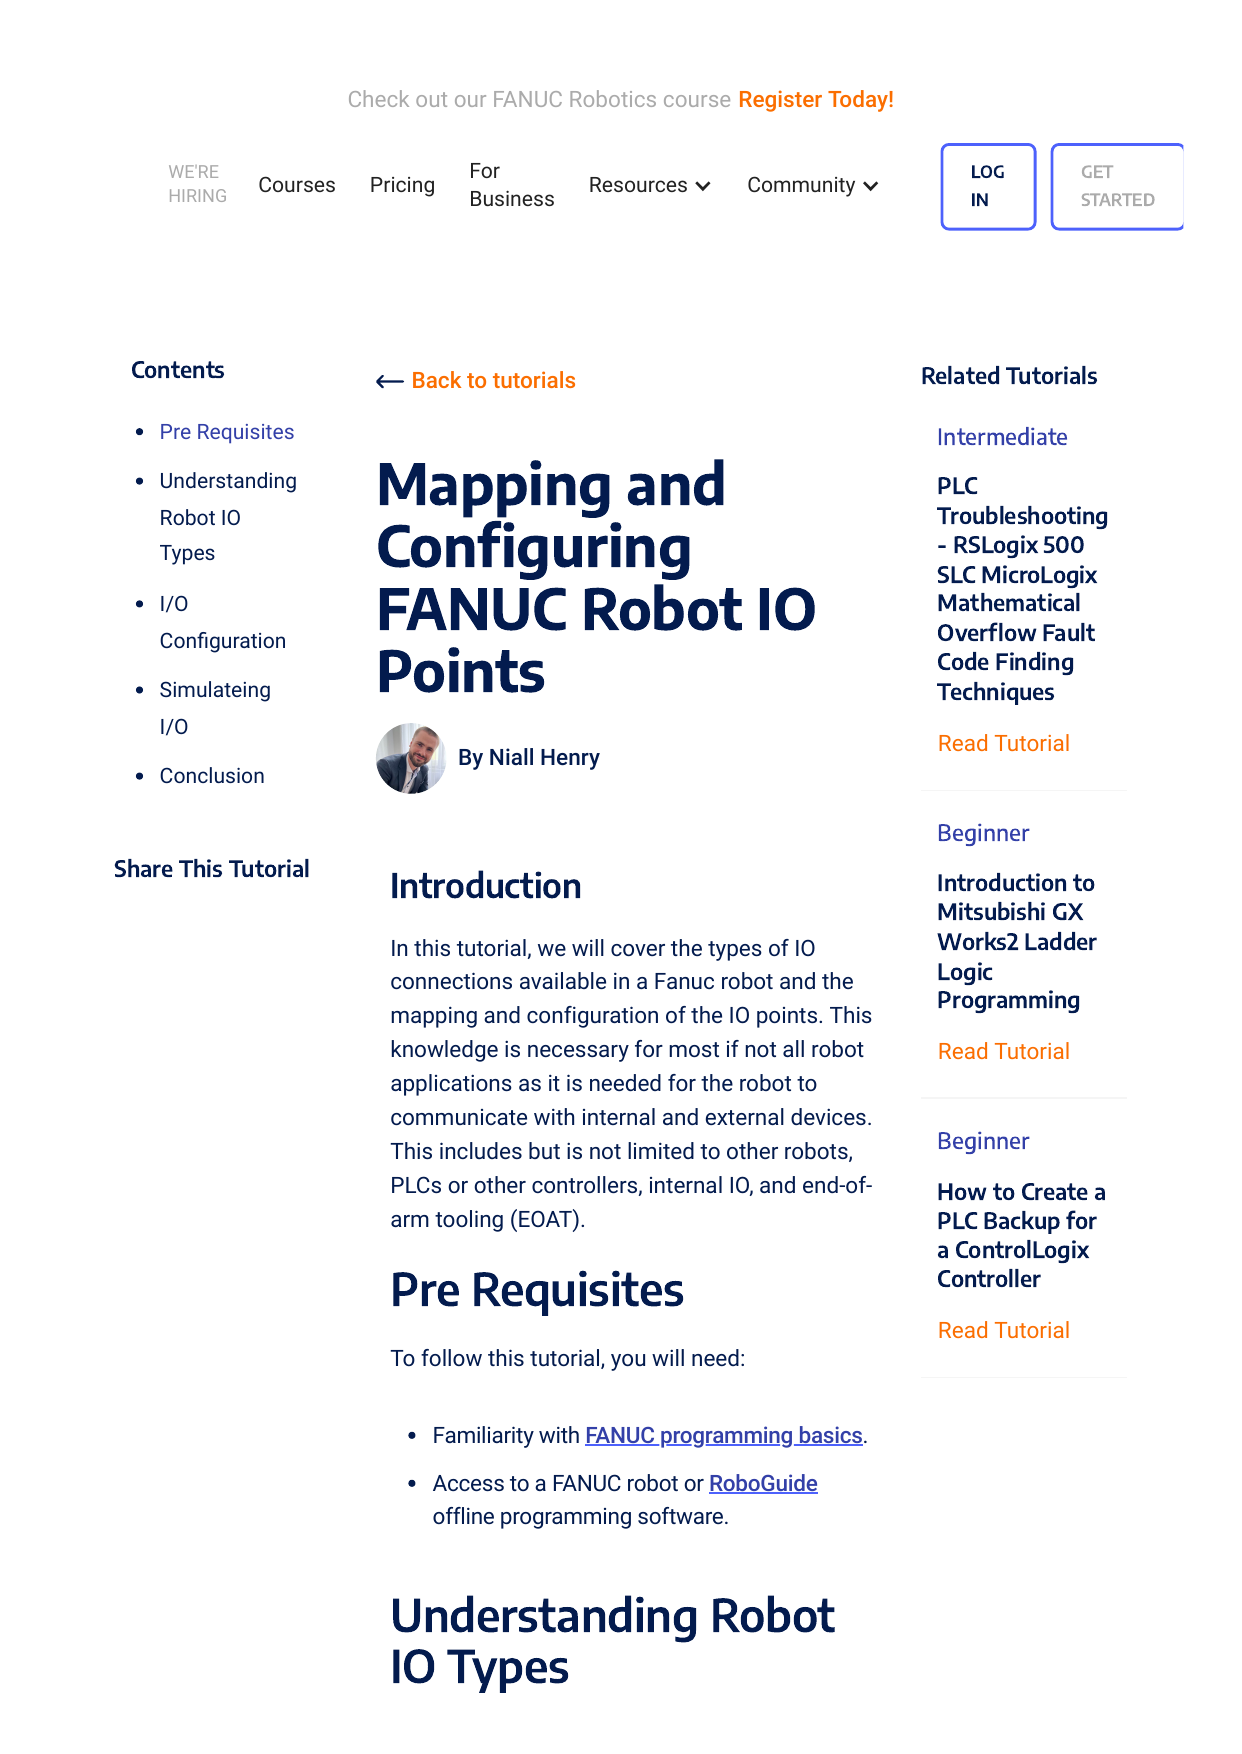 Mapping and Configuring Robot IO Points